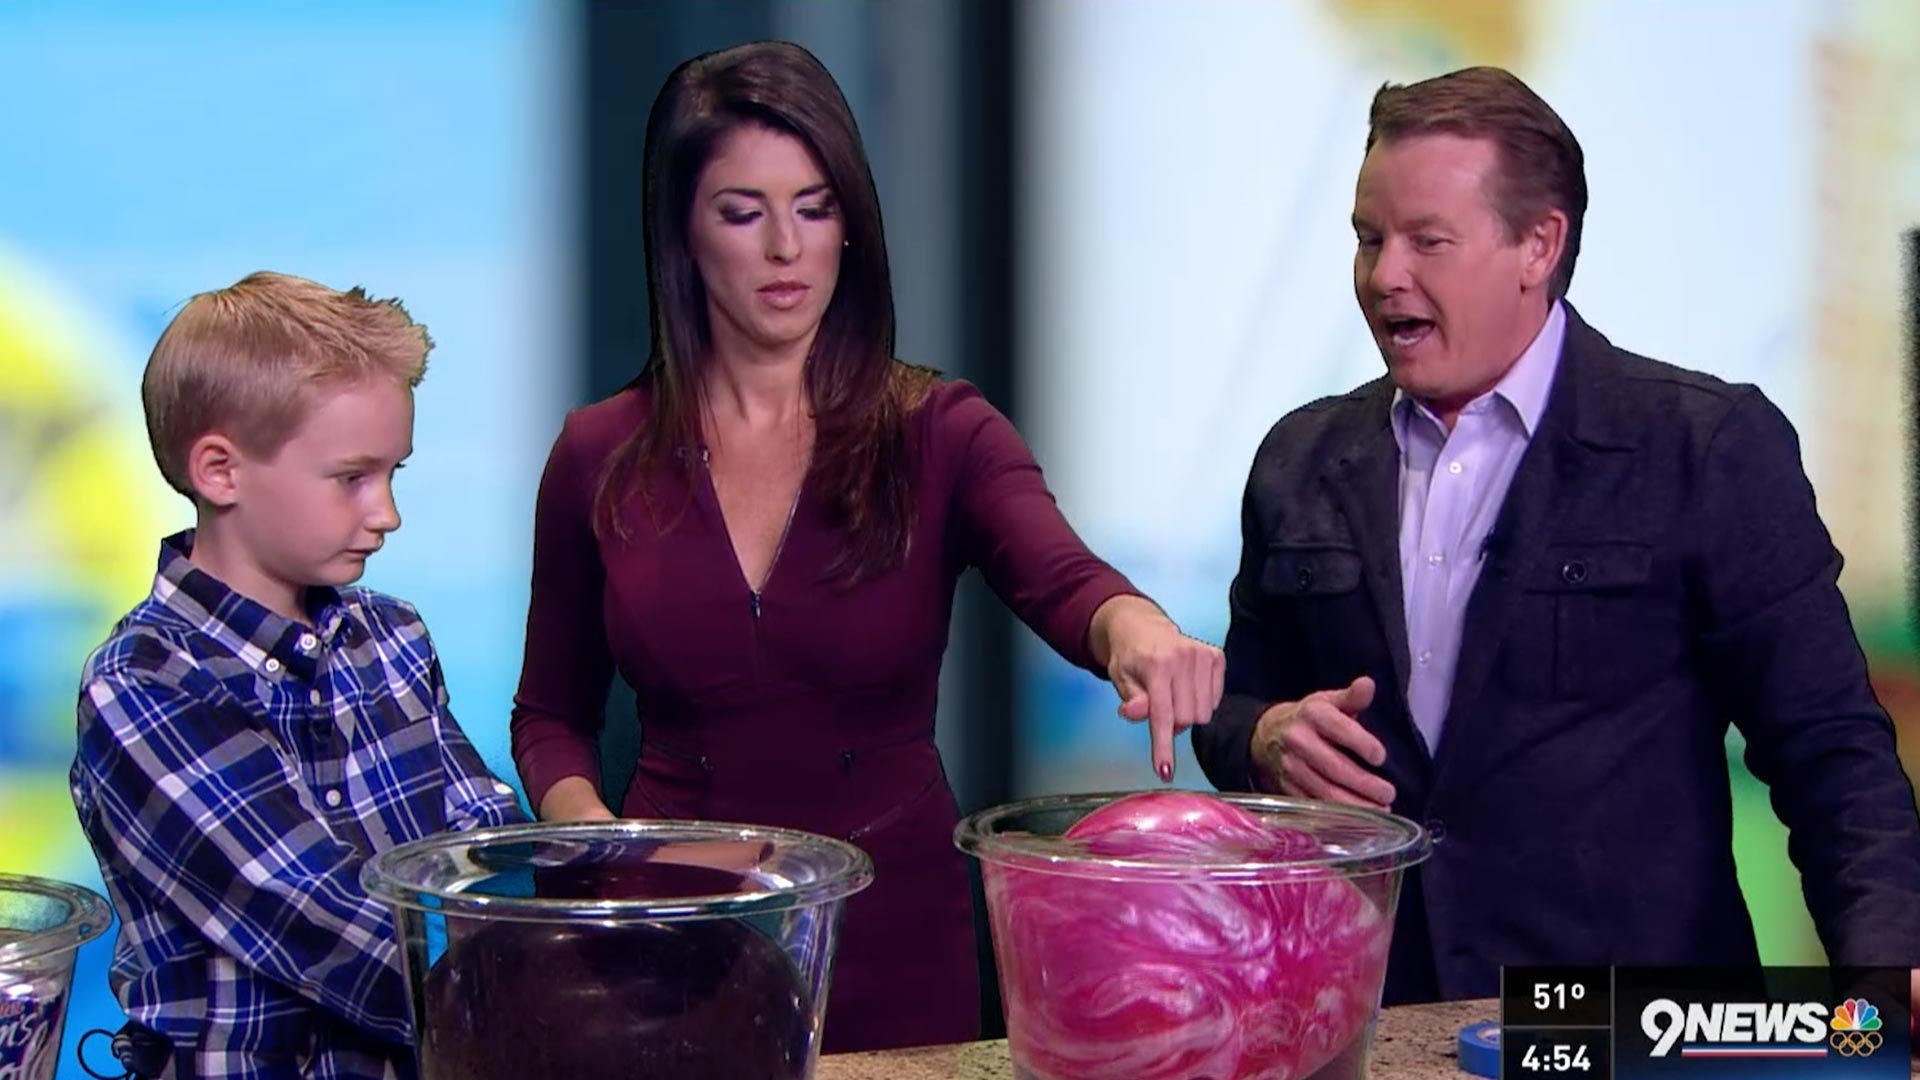 Bowling Balls and Soda - The Science of Density Steve Spangler 9News